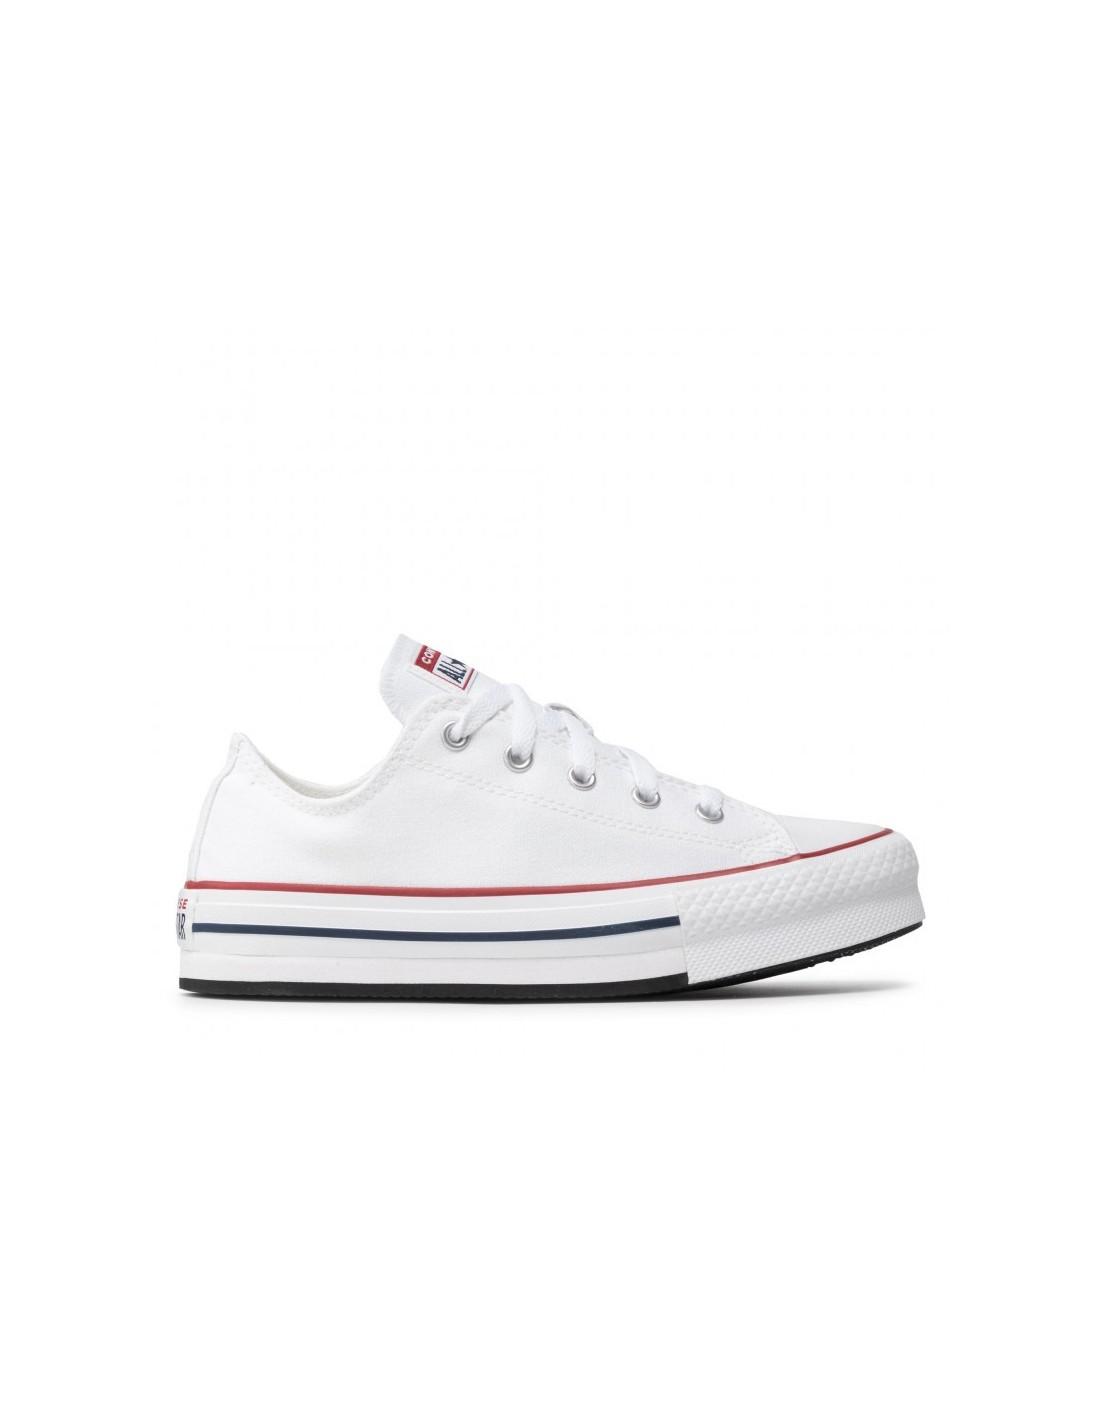 Converse Sneakers Chuck Taylor All Star Eva Lift in White | Lyst